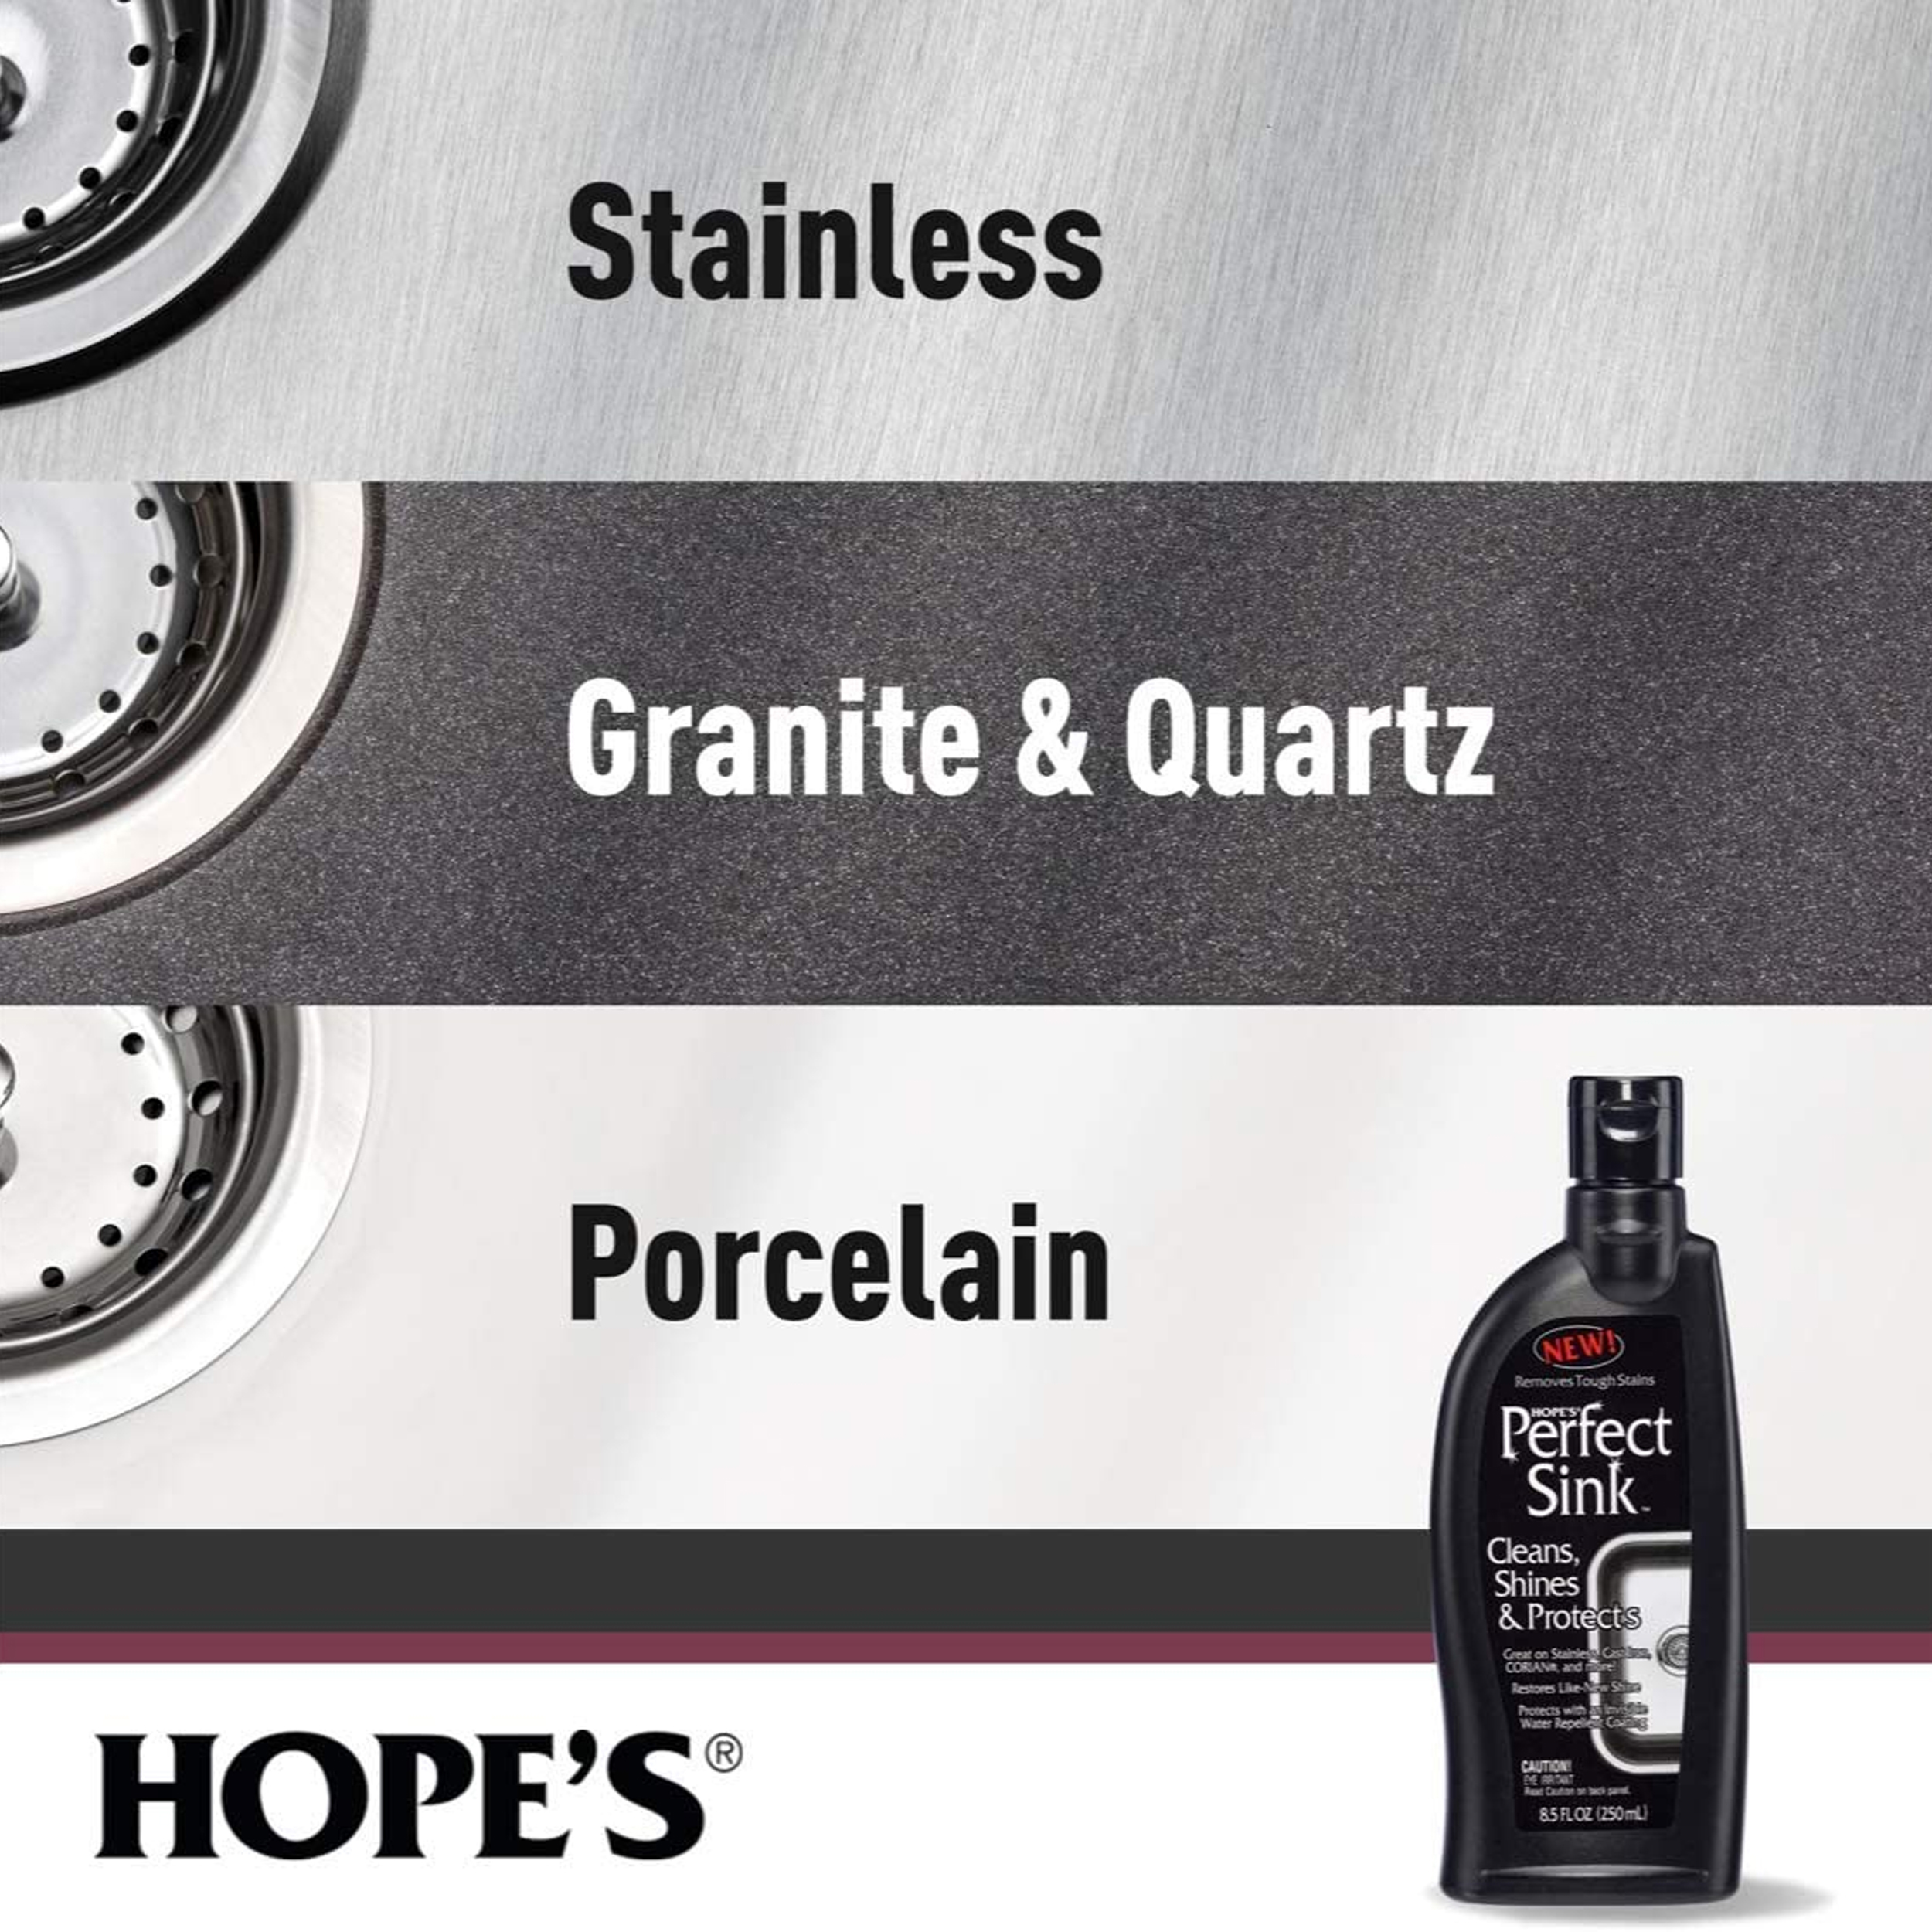 Hope's Perfect Sink Cleaner and Polish, Restorative, Removes Stains, Cast Iron, Corian, Composite, Acrylic, 8.5 Fl Oz - image 3 of 9